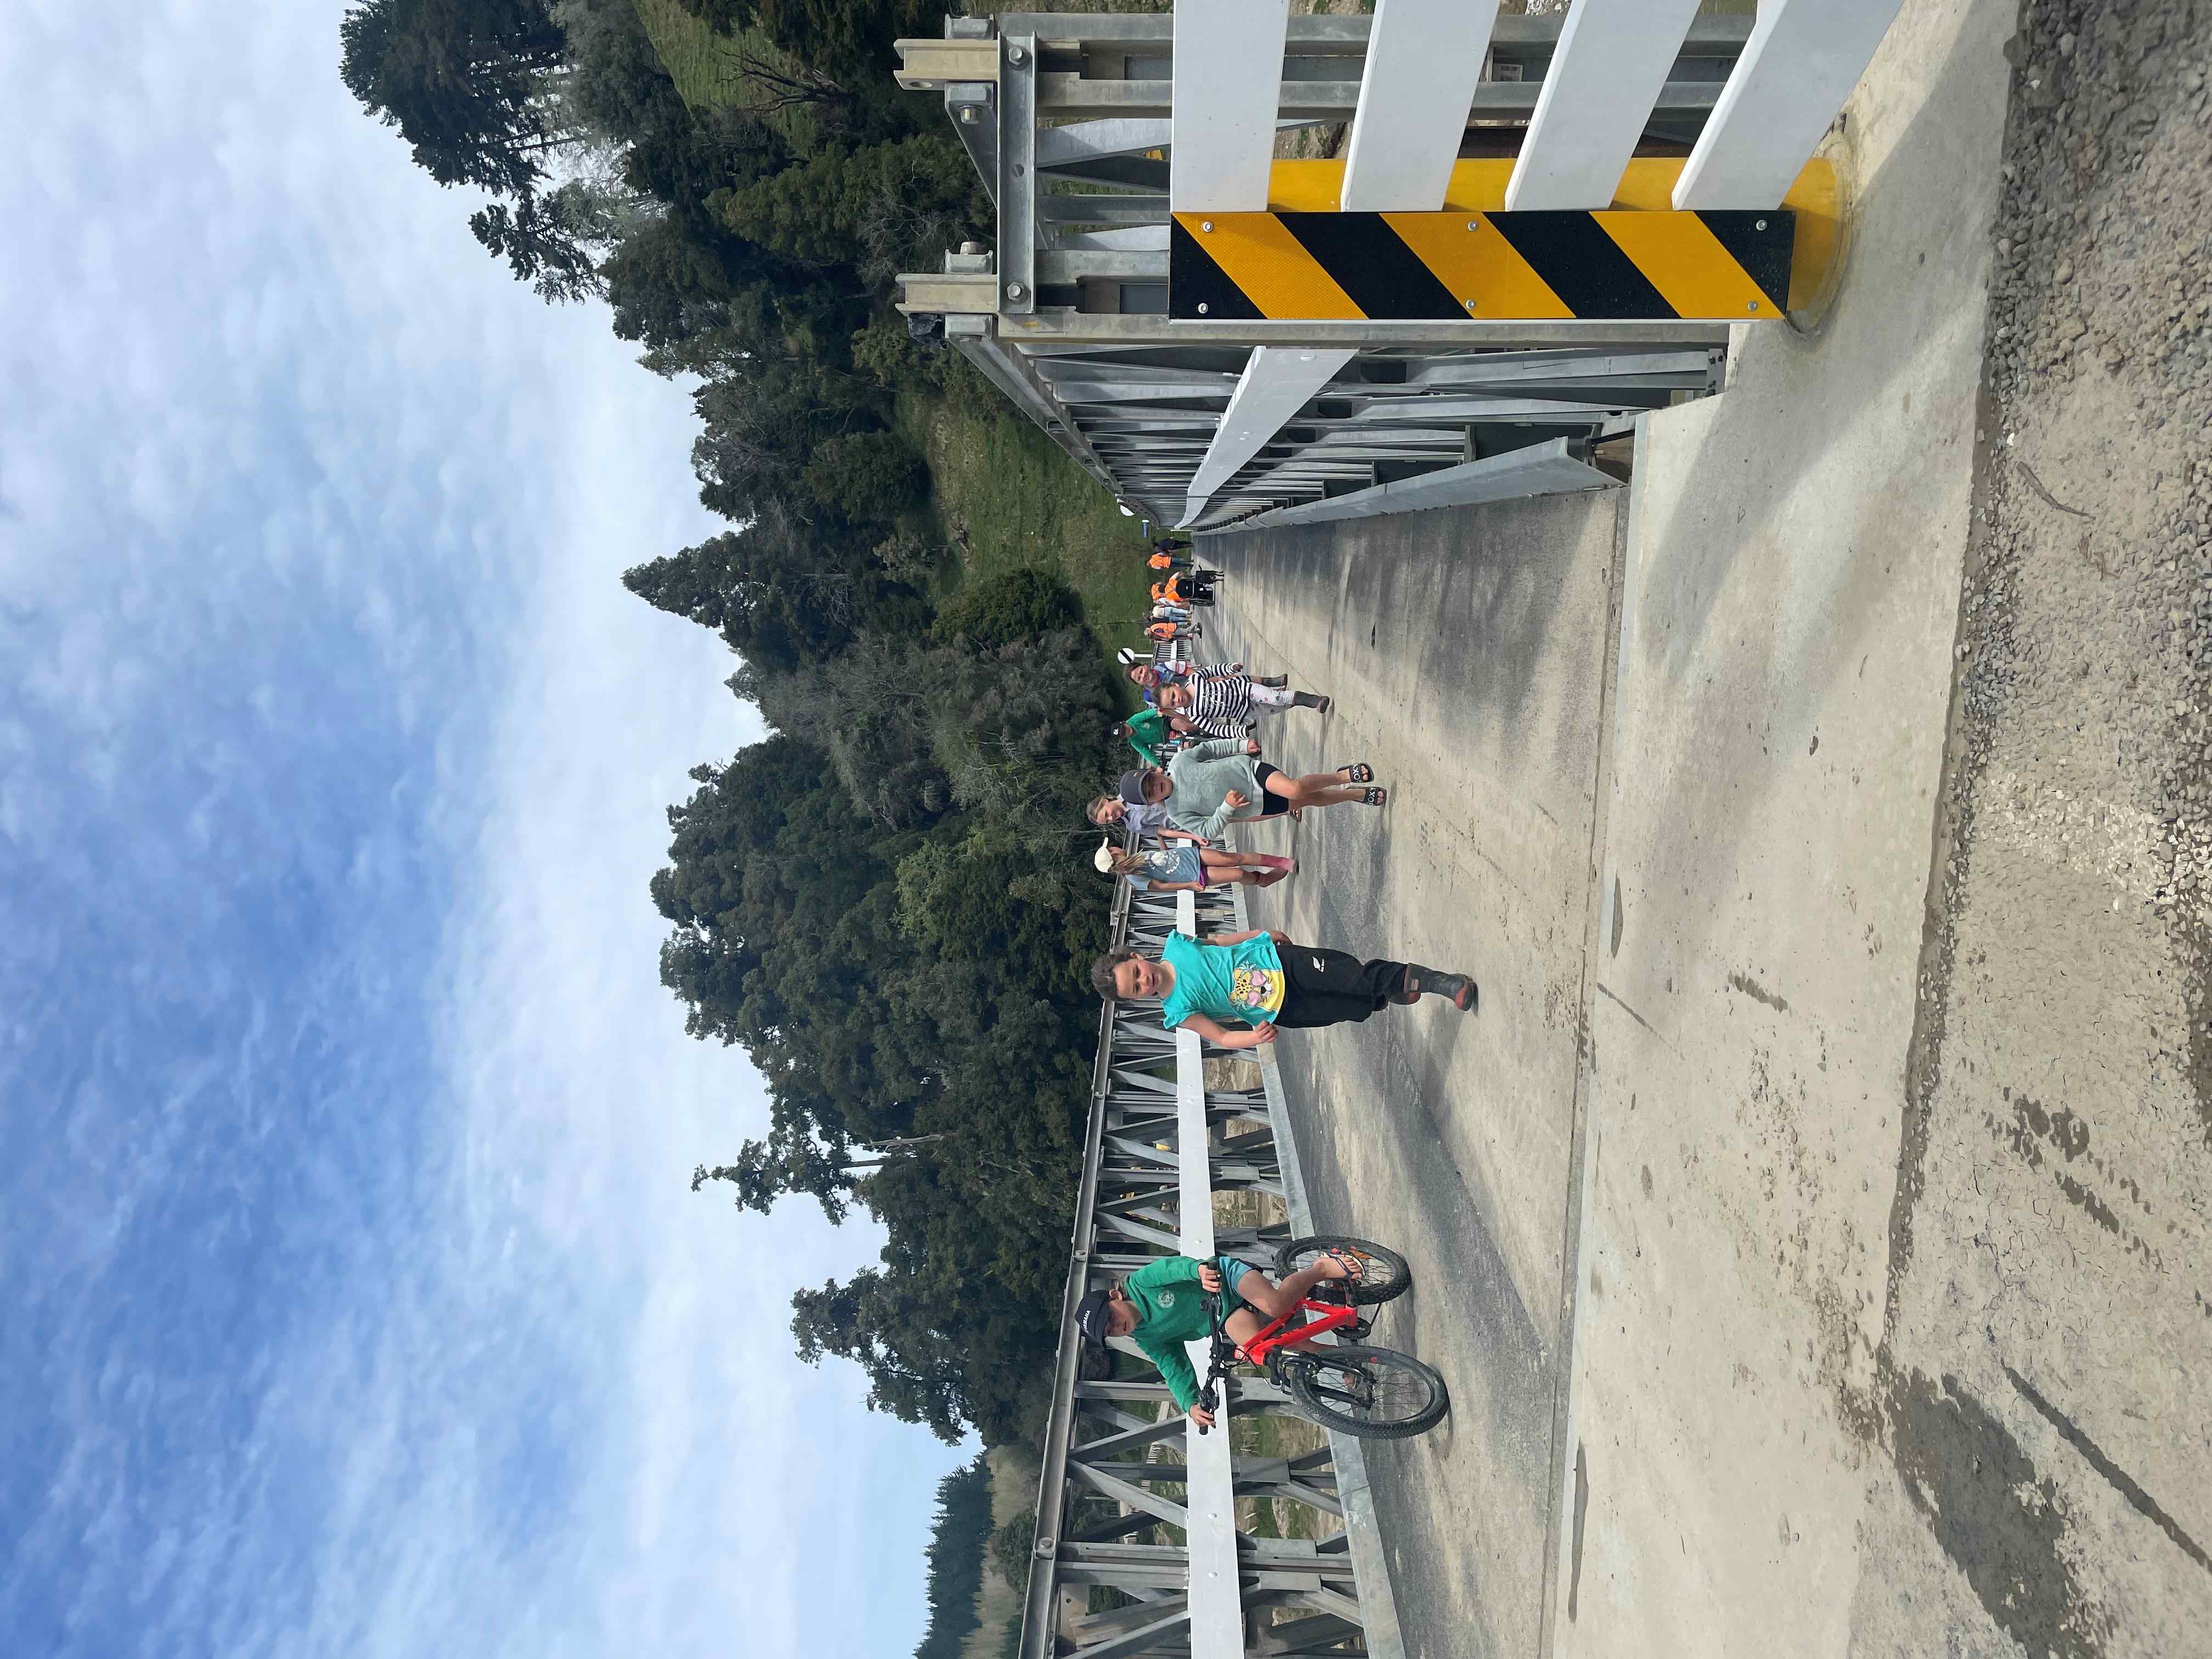 Hollywood Bridge opening day with kids